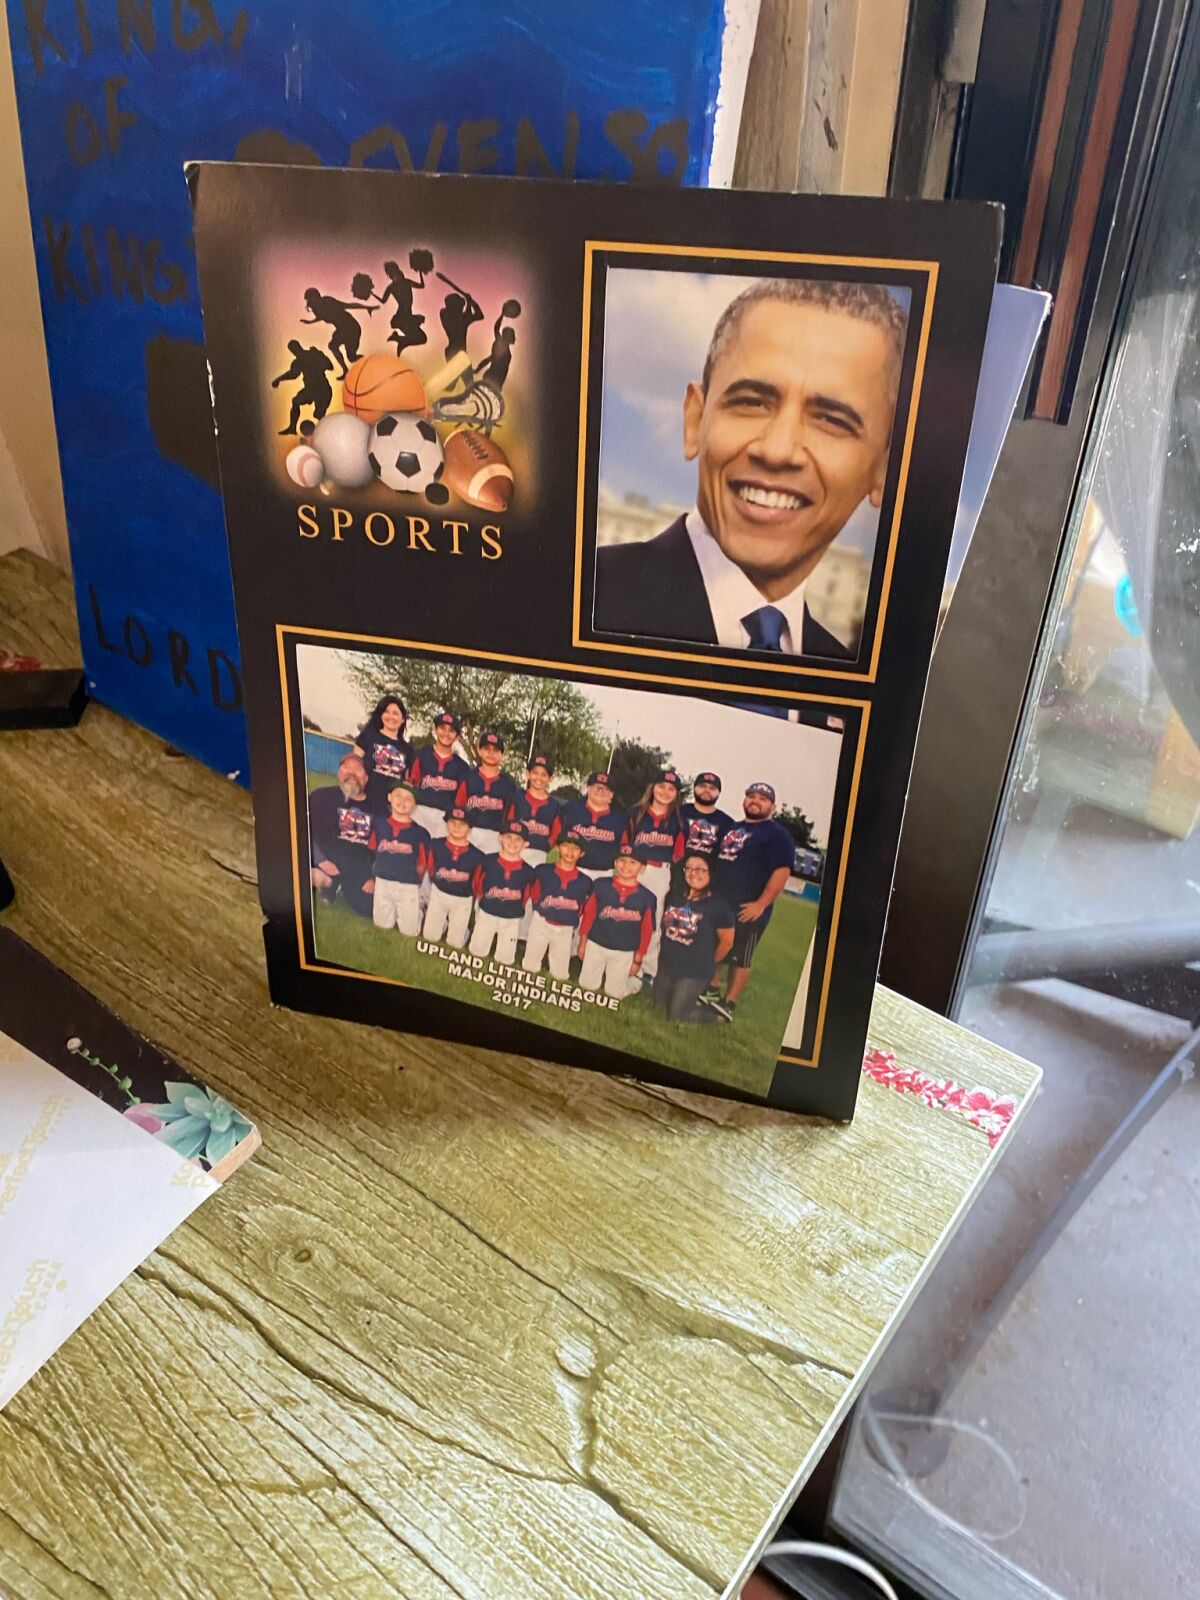 A photo of President Obama inside Graciela and Sonia Murillo's home.